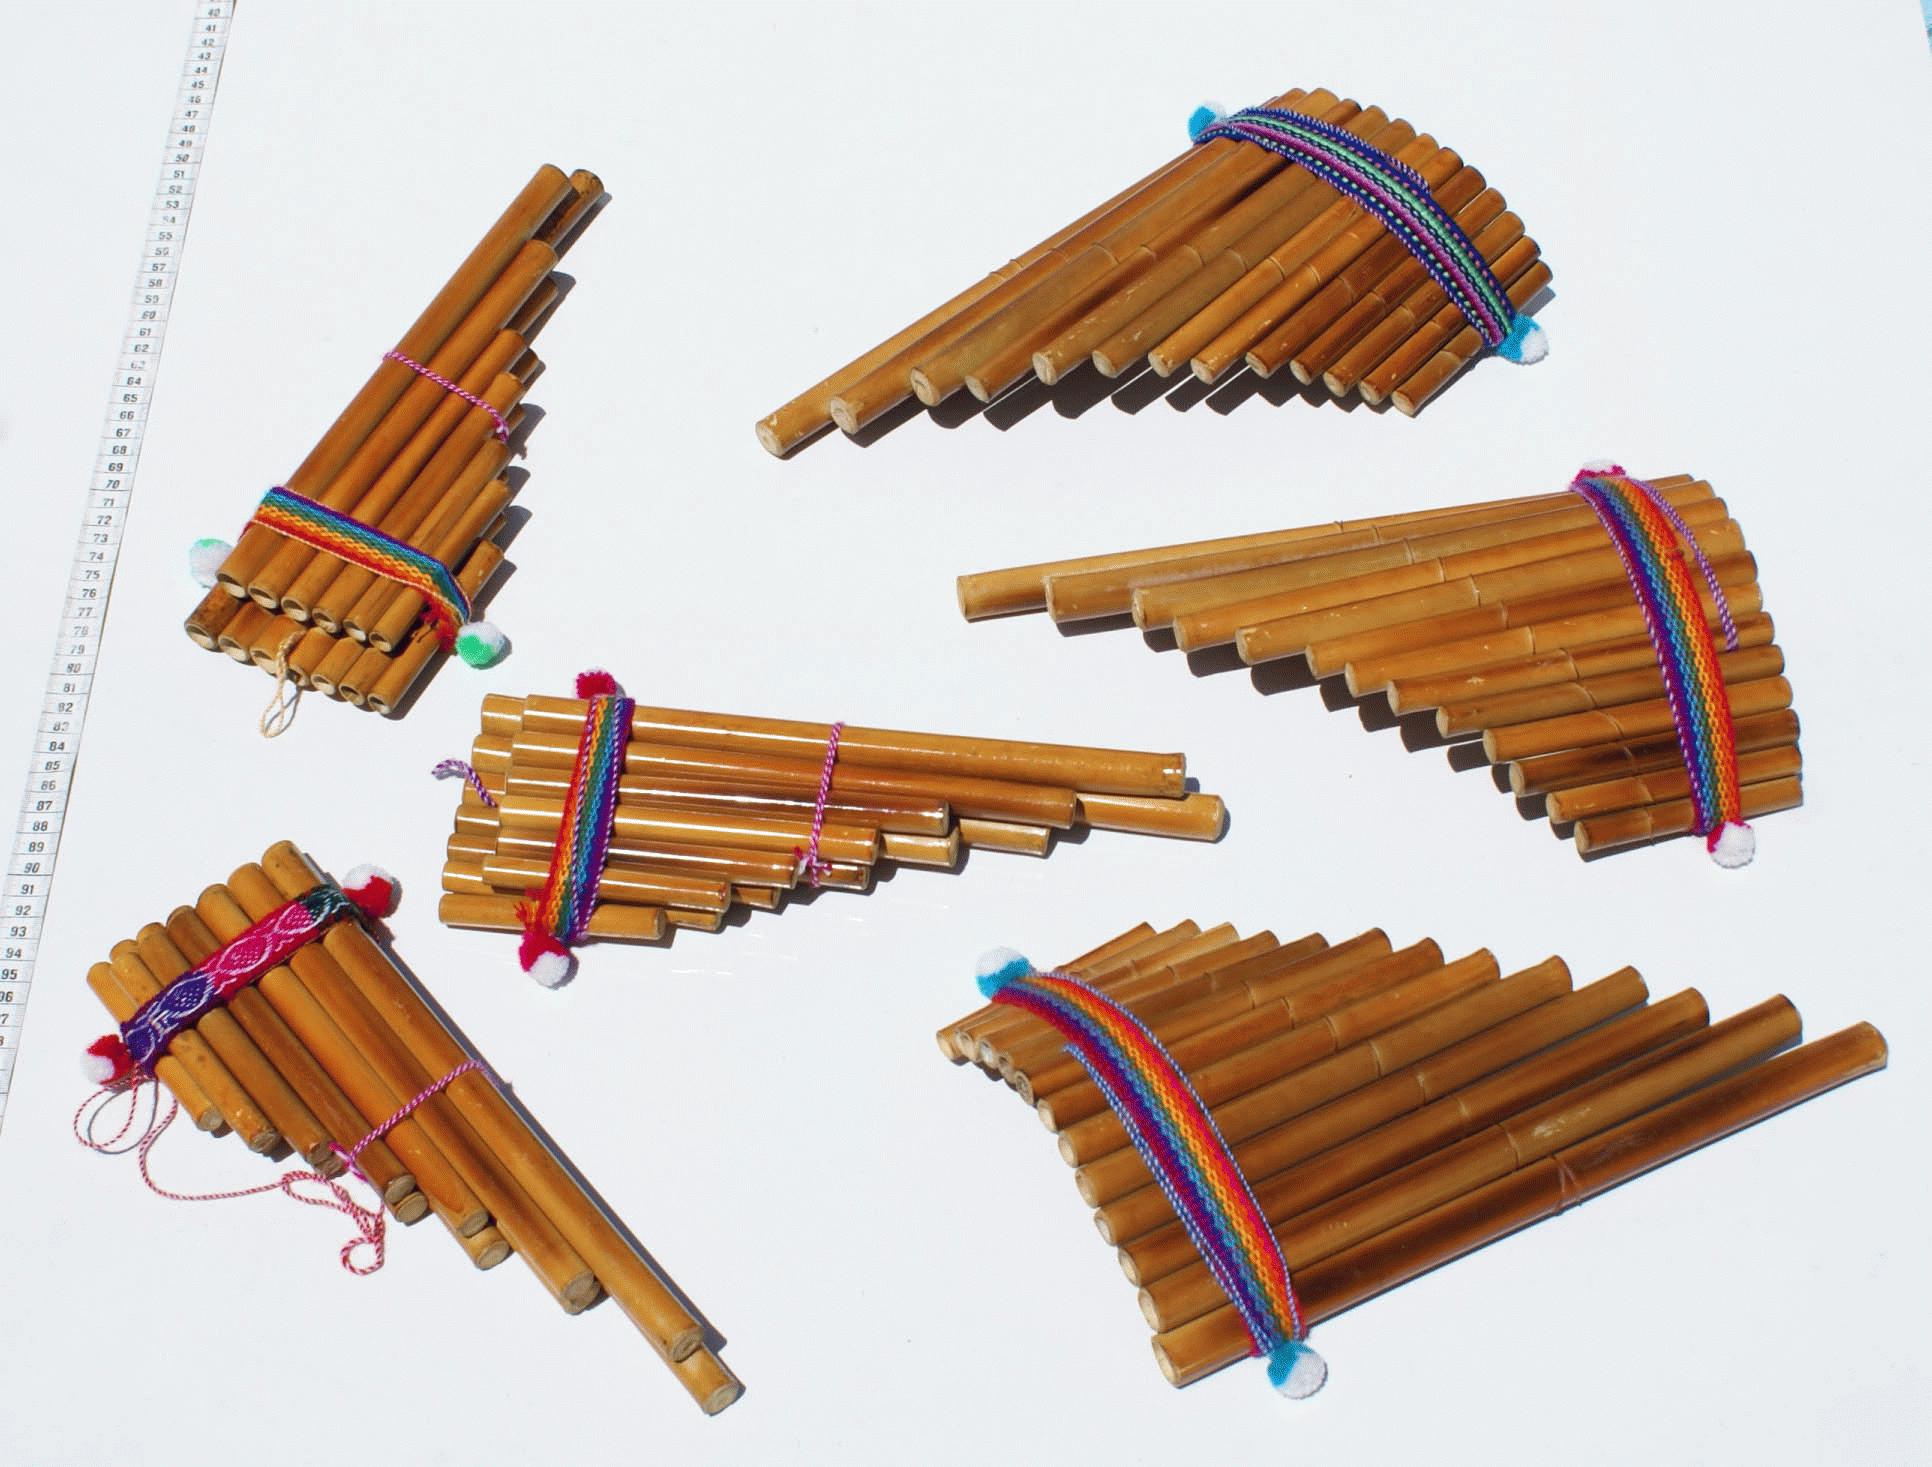 Instrumentos musicales, jewelry, carvings, from